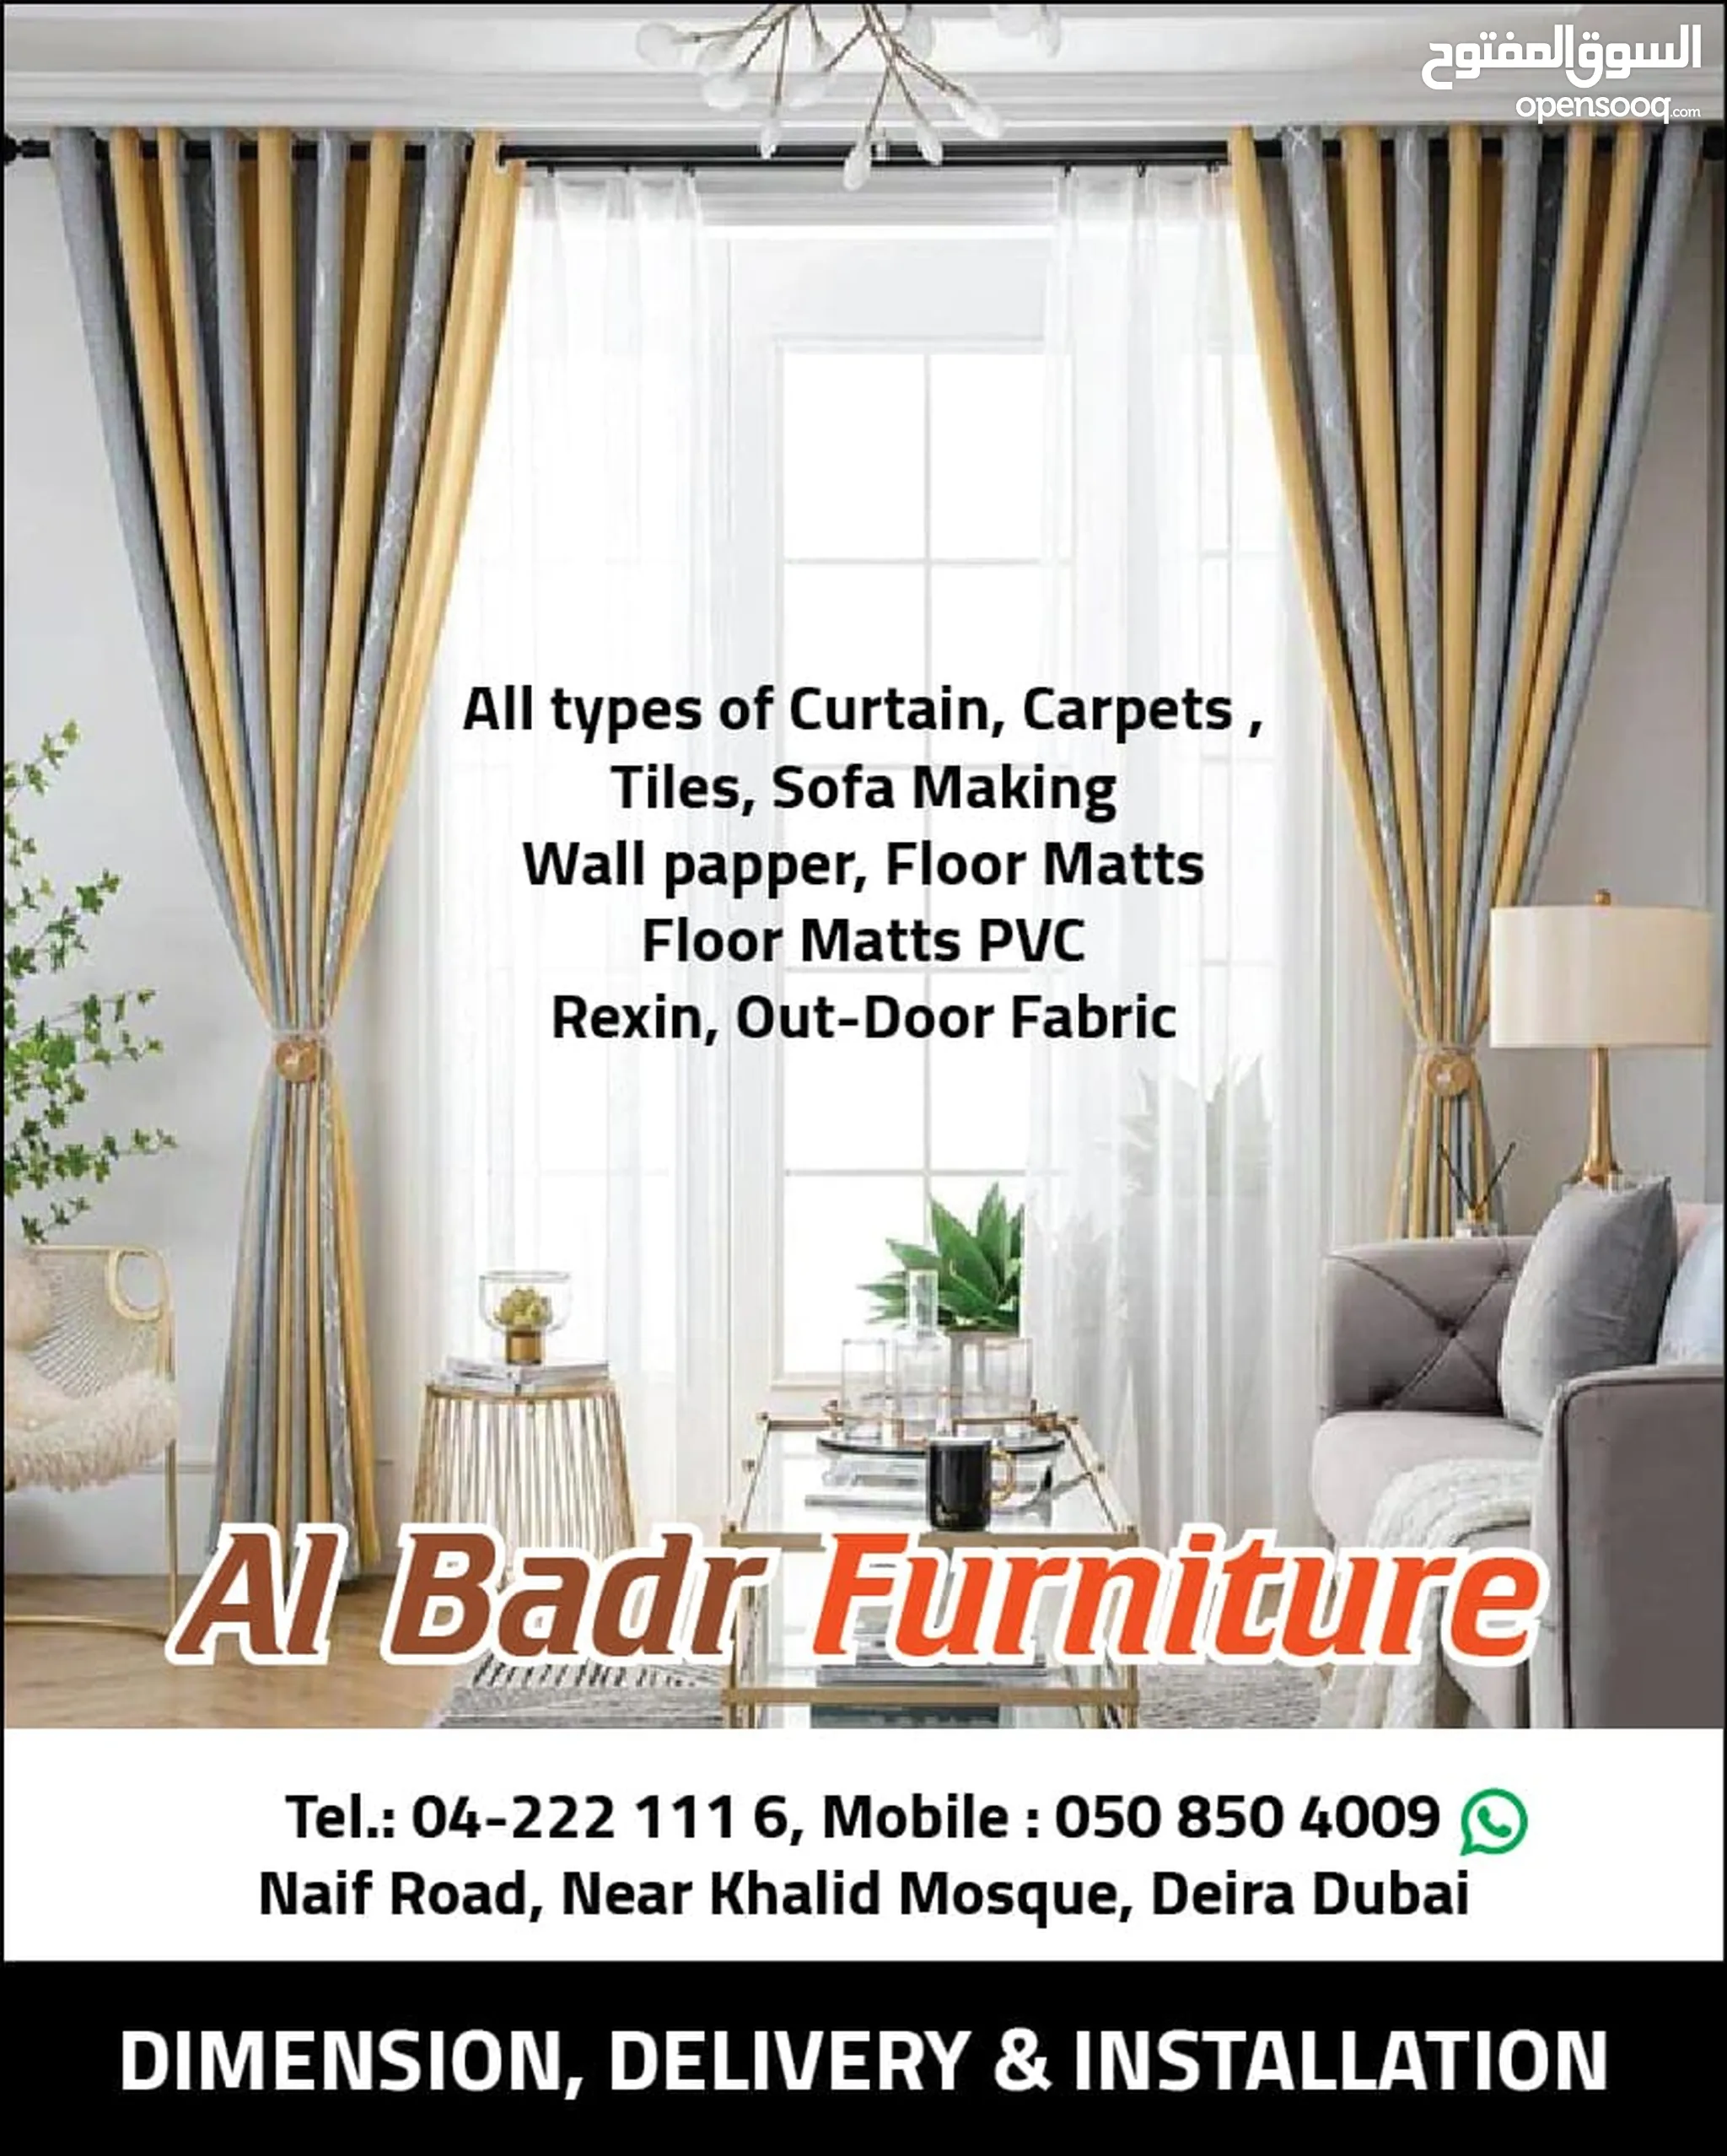 Get Your Furniture Looking New with Our Upholstery Services in Dubai -  Revamp Your Home Now | OpenSooq